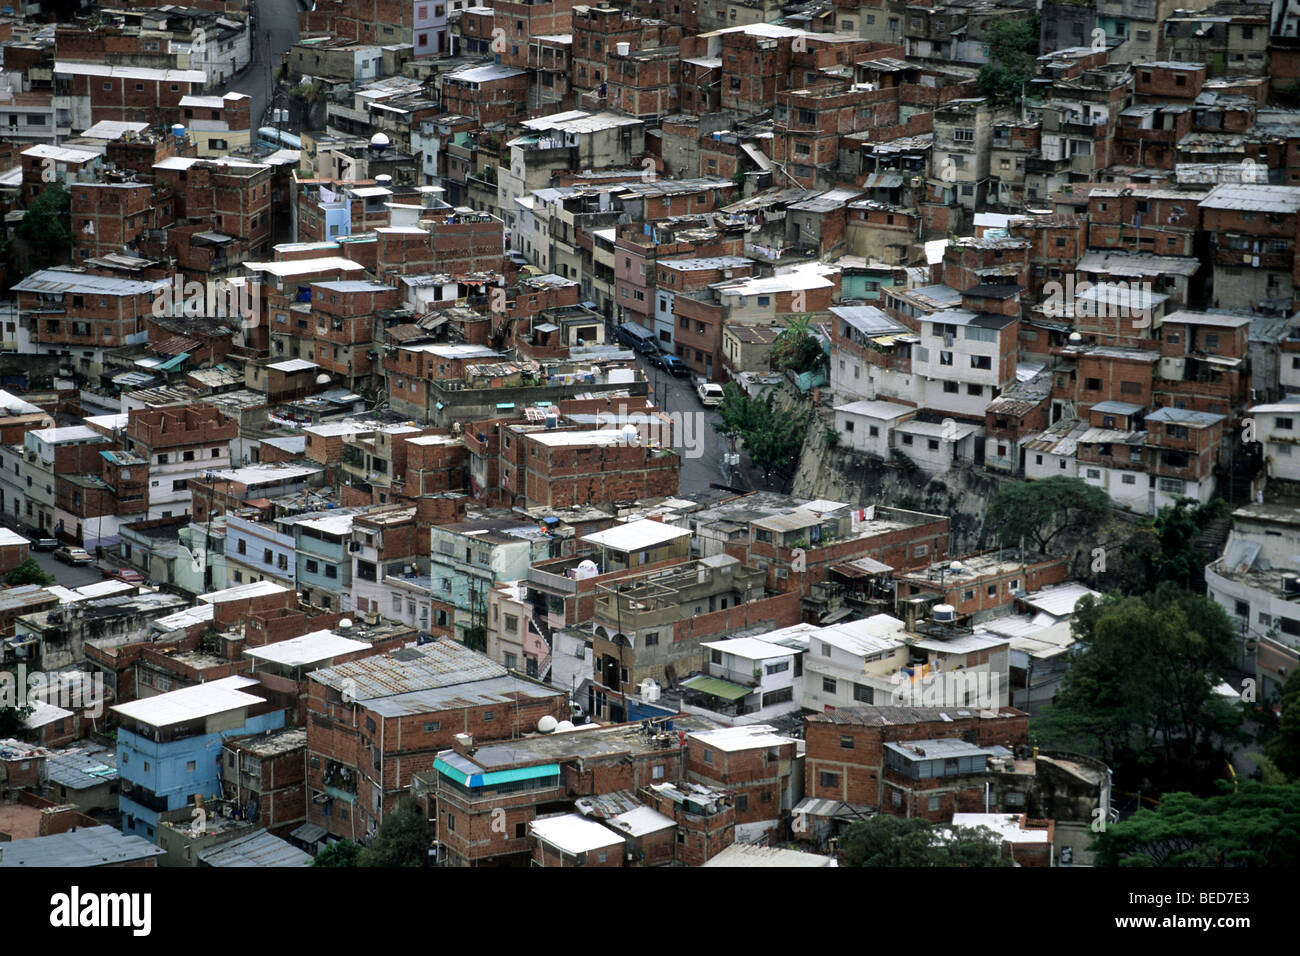 Simple houses, ranchos, view of the ghetto district of the capital city Caracas, Caribbean, Venezuela, South America Stock Photo